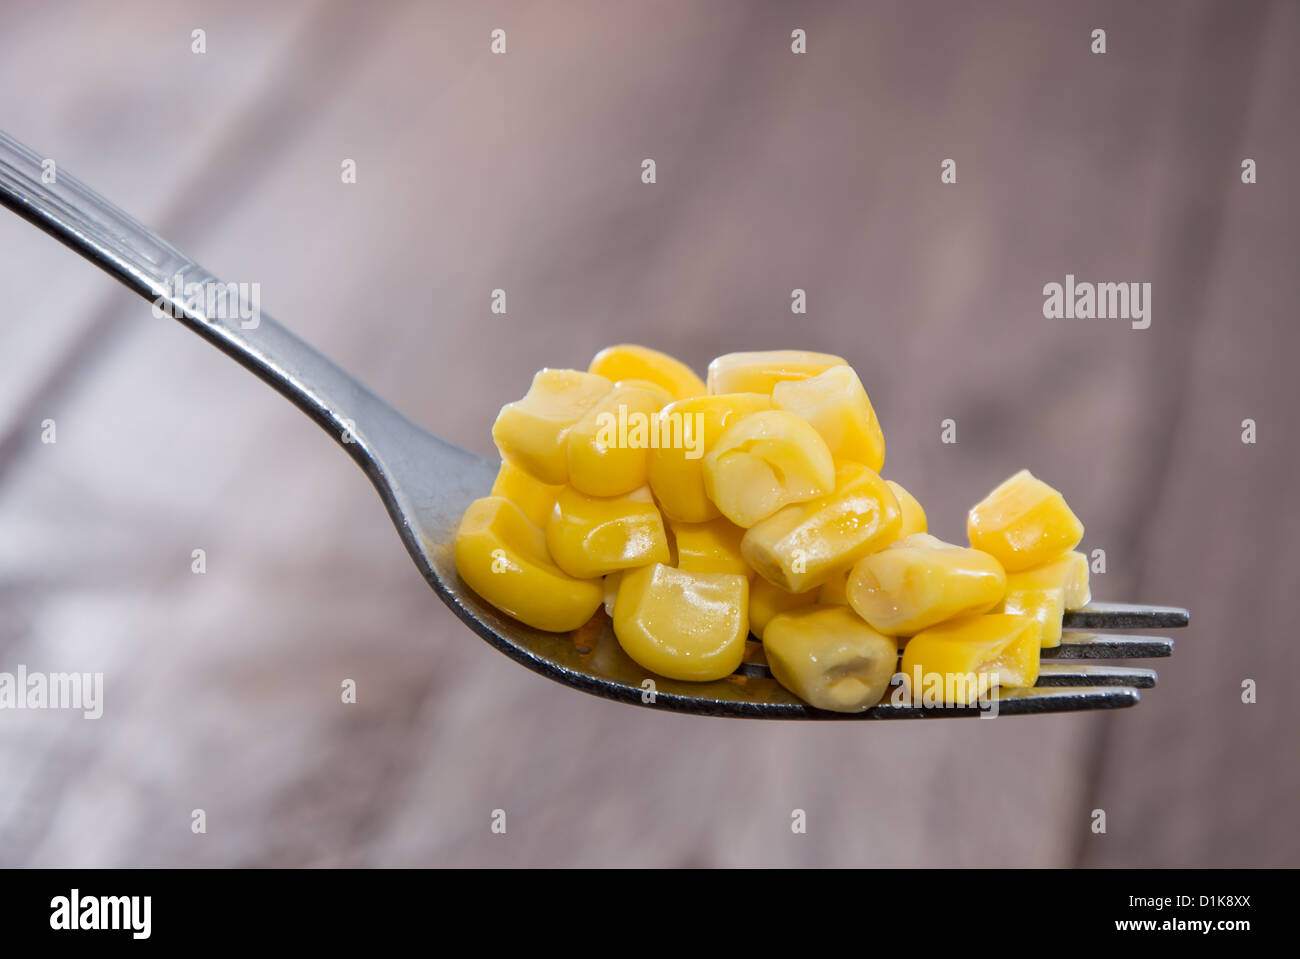 Corn on a Fork on wooden background Stock Photo